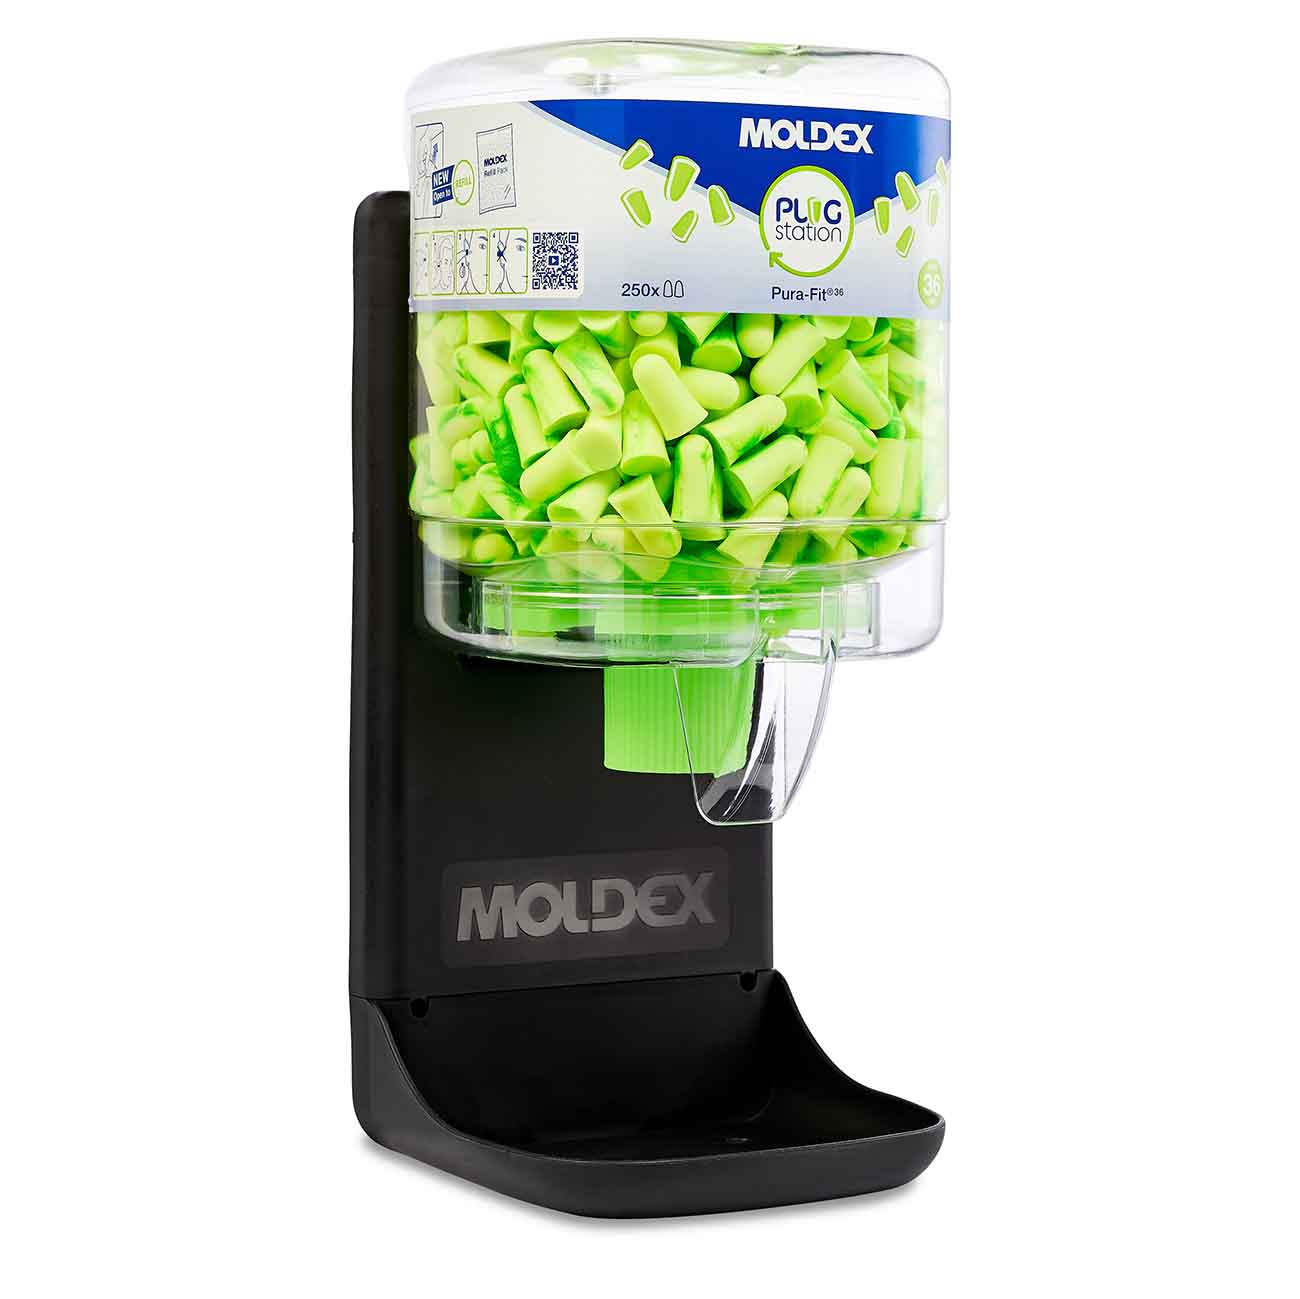 MOLDEX 7725 Pura-Fit Station 250 Pairs Earplugs Dispenser with wall mount